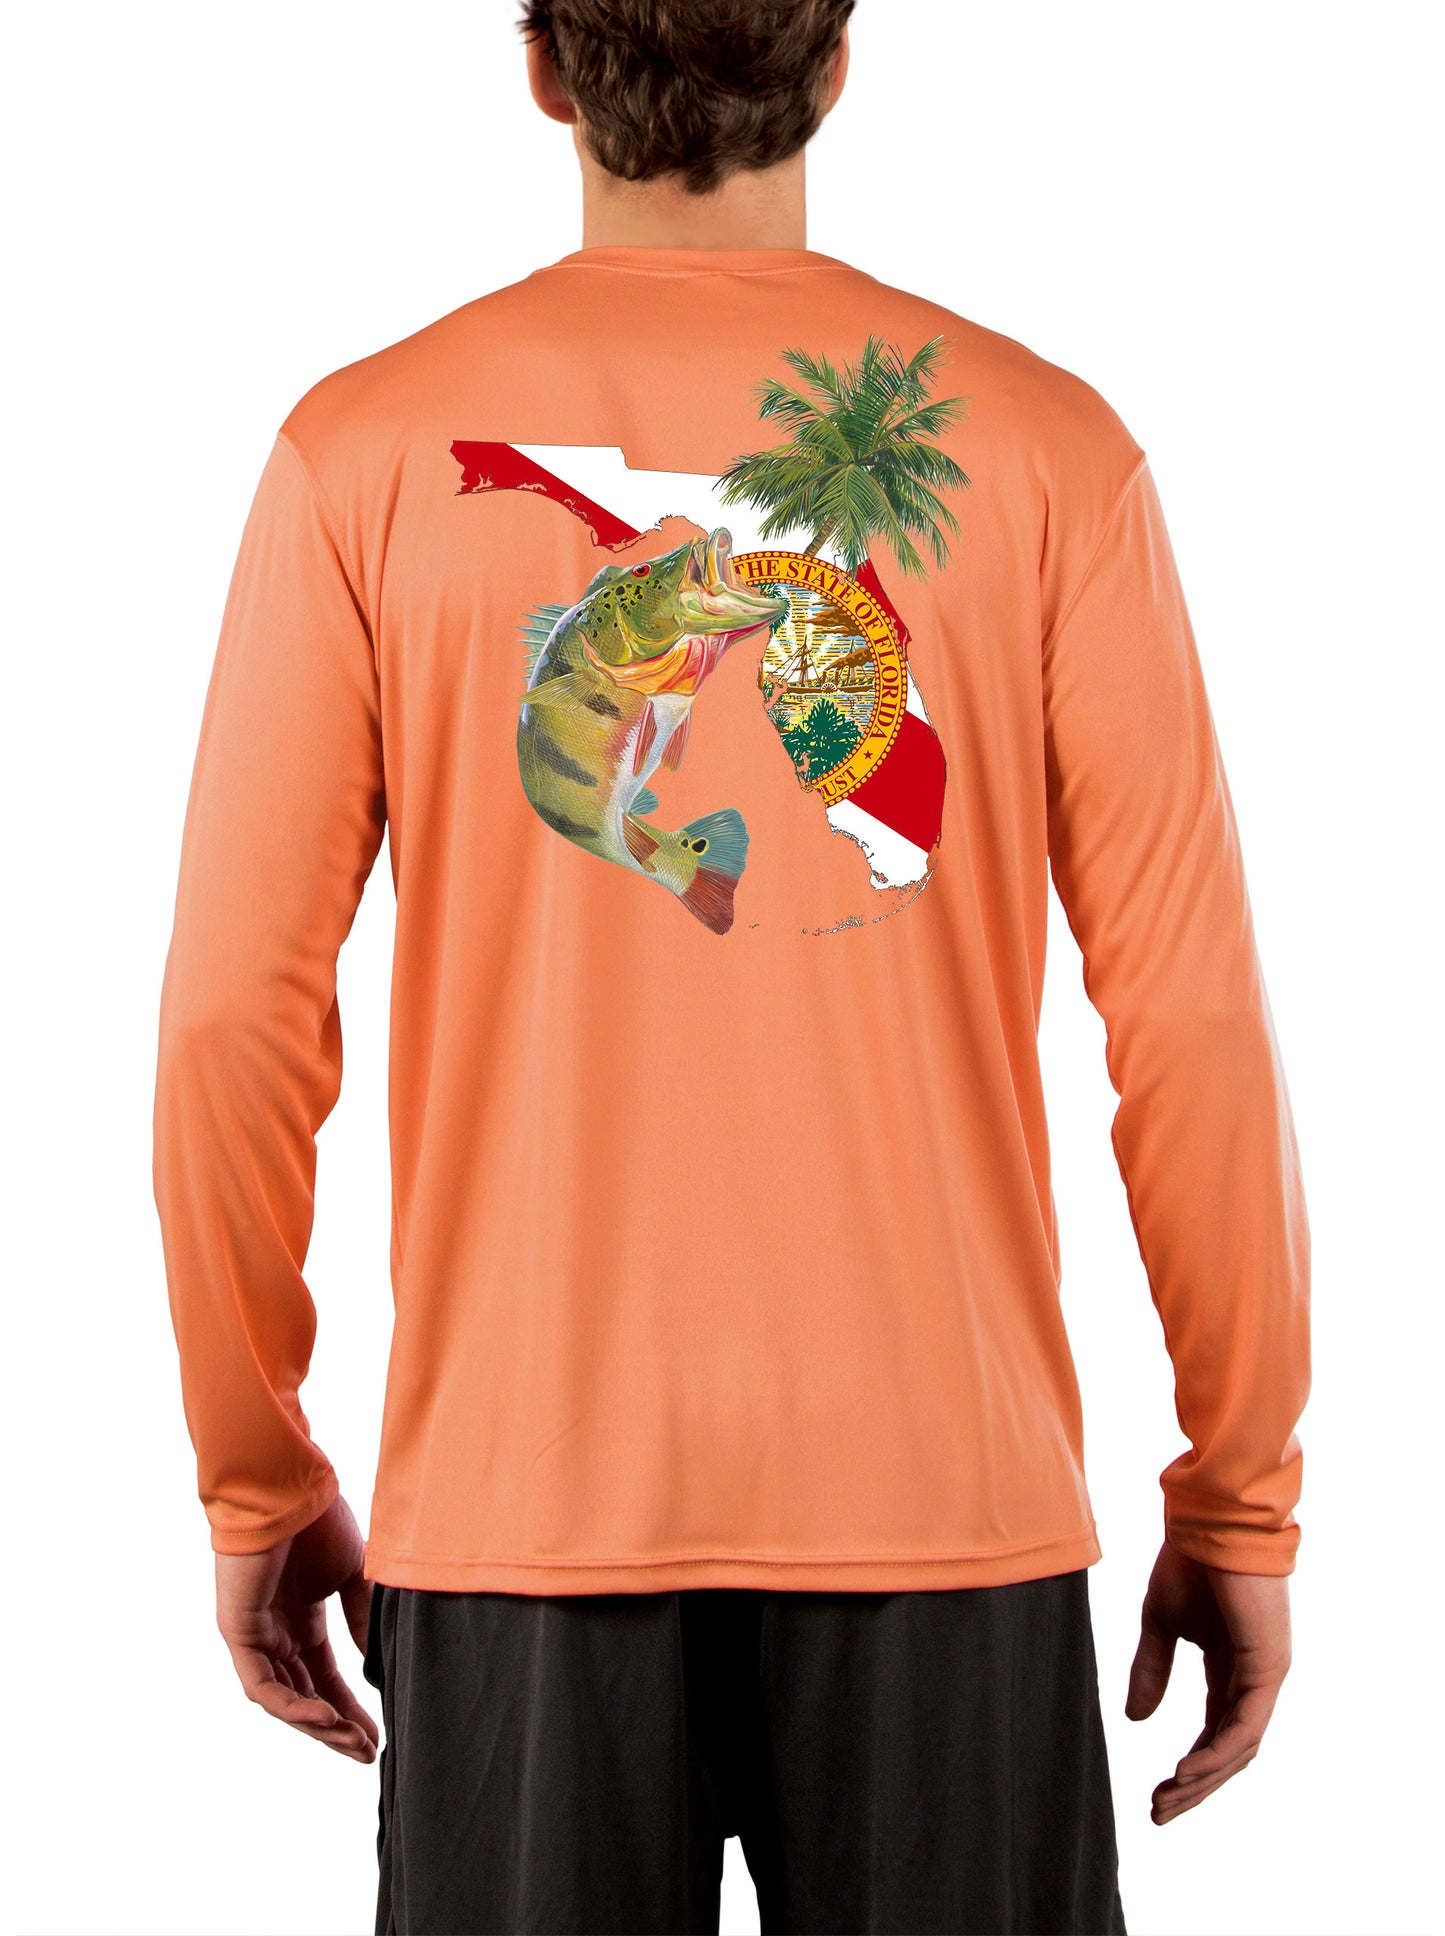 [New Artwork] Peacock Bass Florida Map Fishing Shirts for Men with Florida State Flag Sleeve Small / Citrus